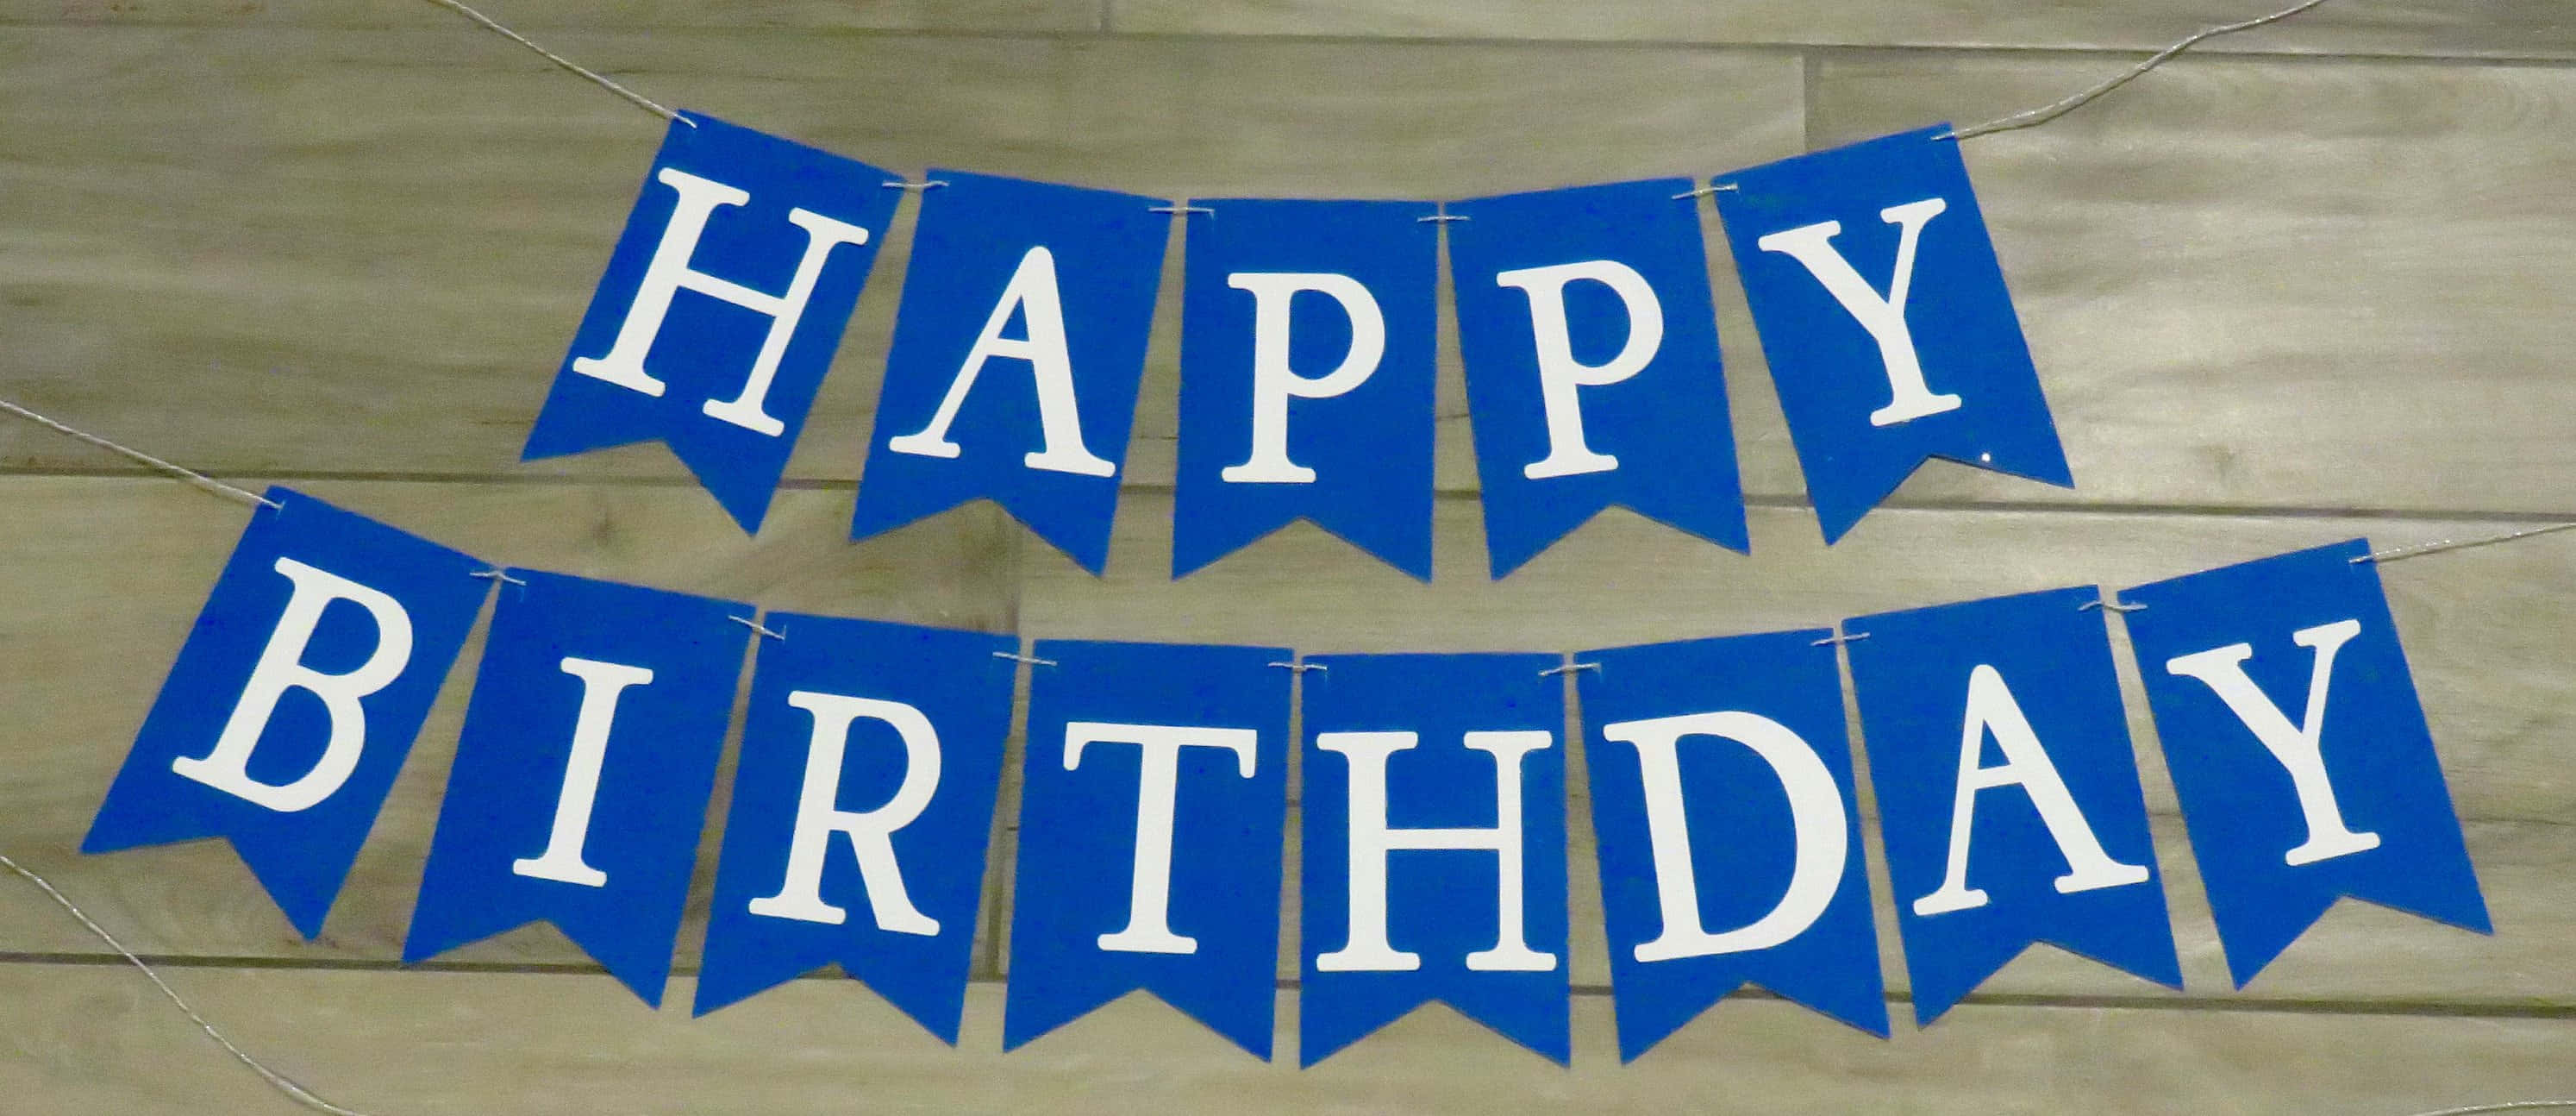 Happy Birthday Banners With Blue Letters